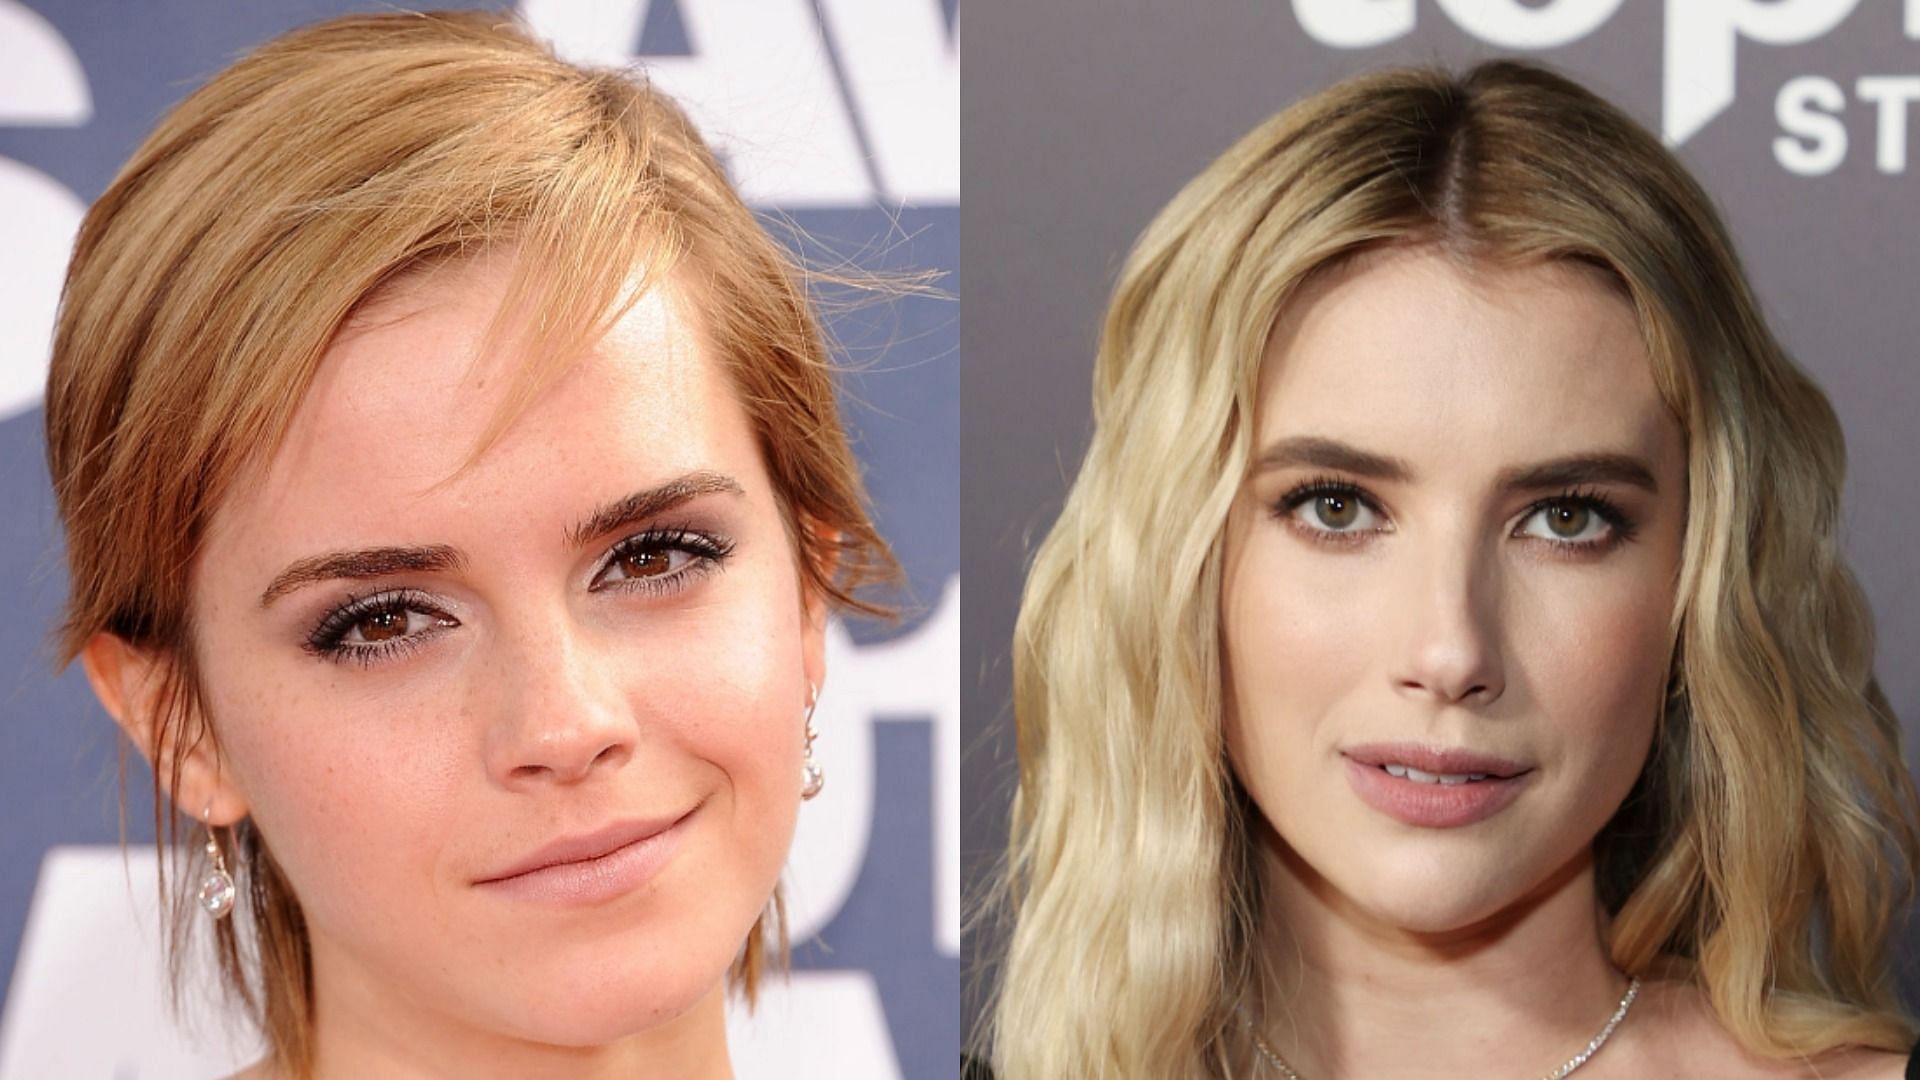 Harry Potter reunion special mistakenly featured Emma Roberts&#039; childhood photo in place of Emma Watson (Image via WireImage/Steve Granitz and Getty Images/Amy Sussman)